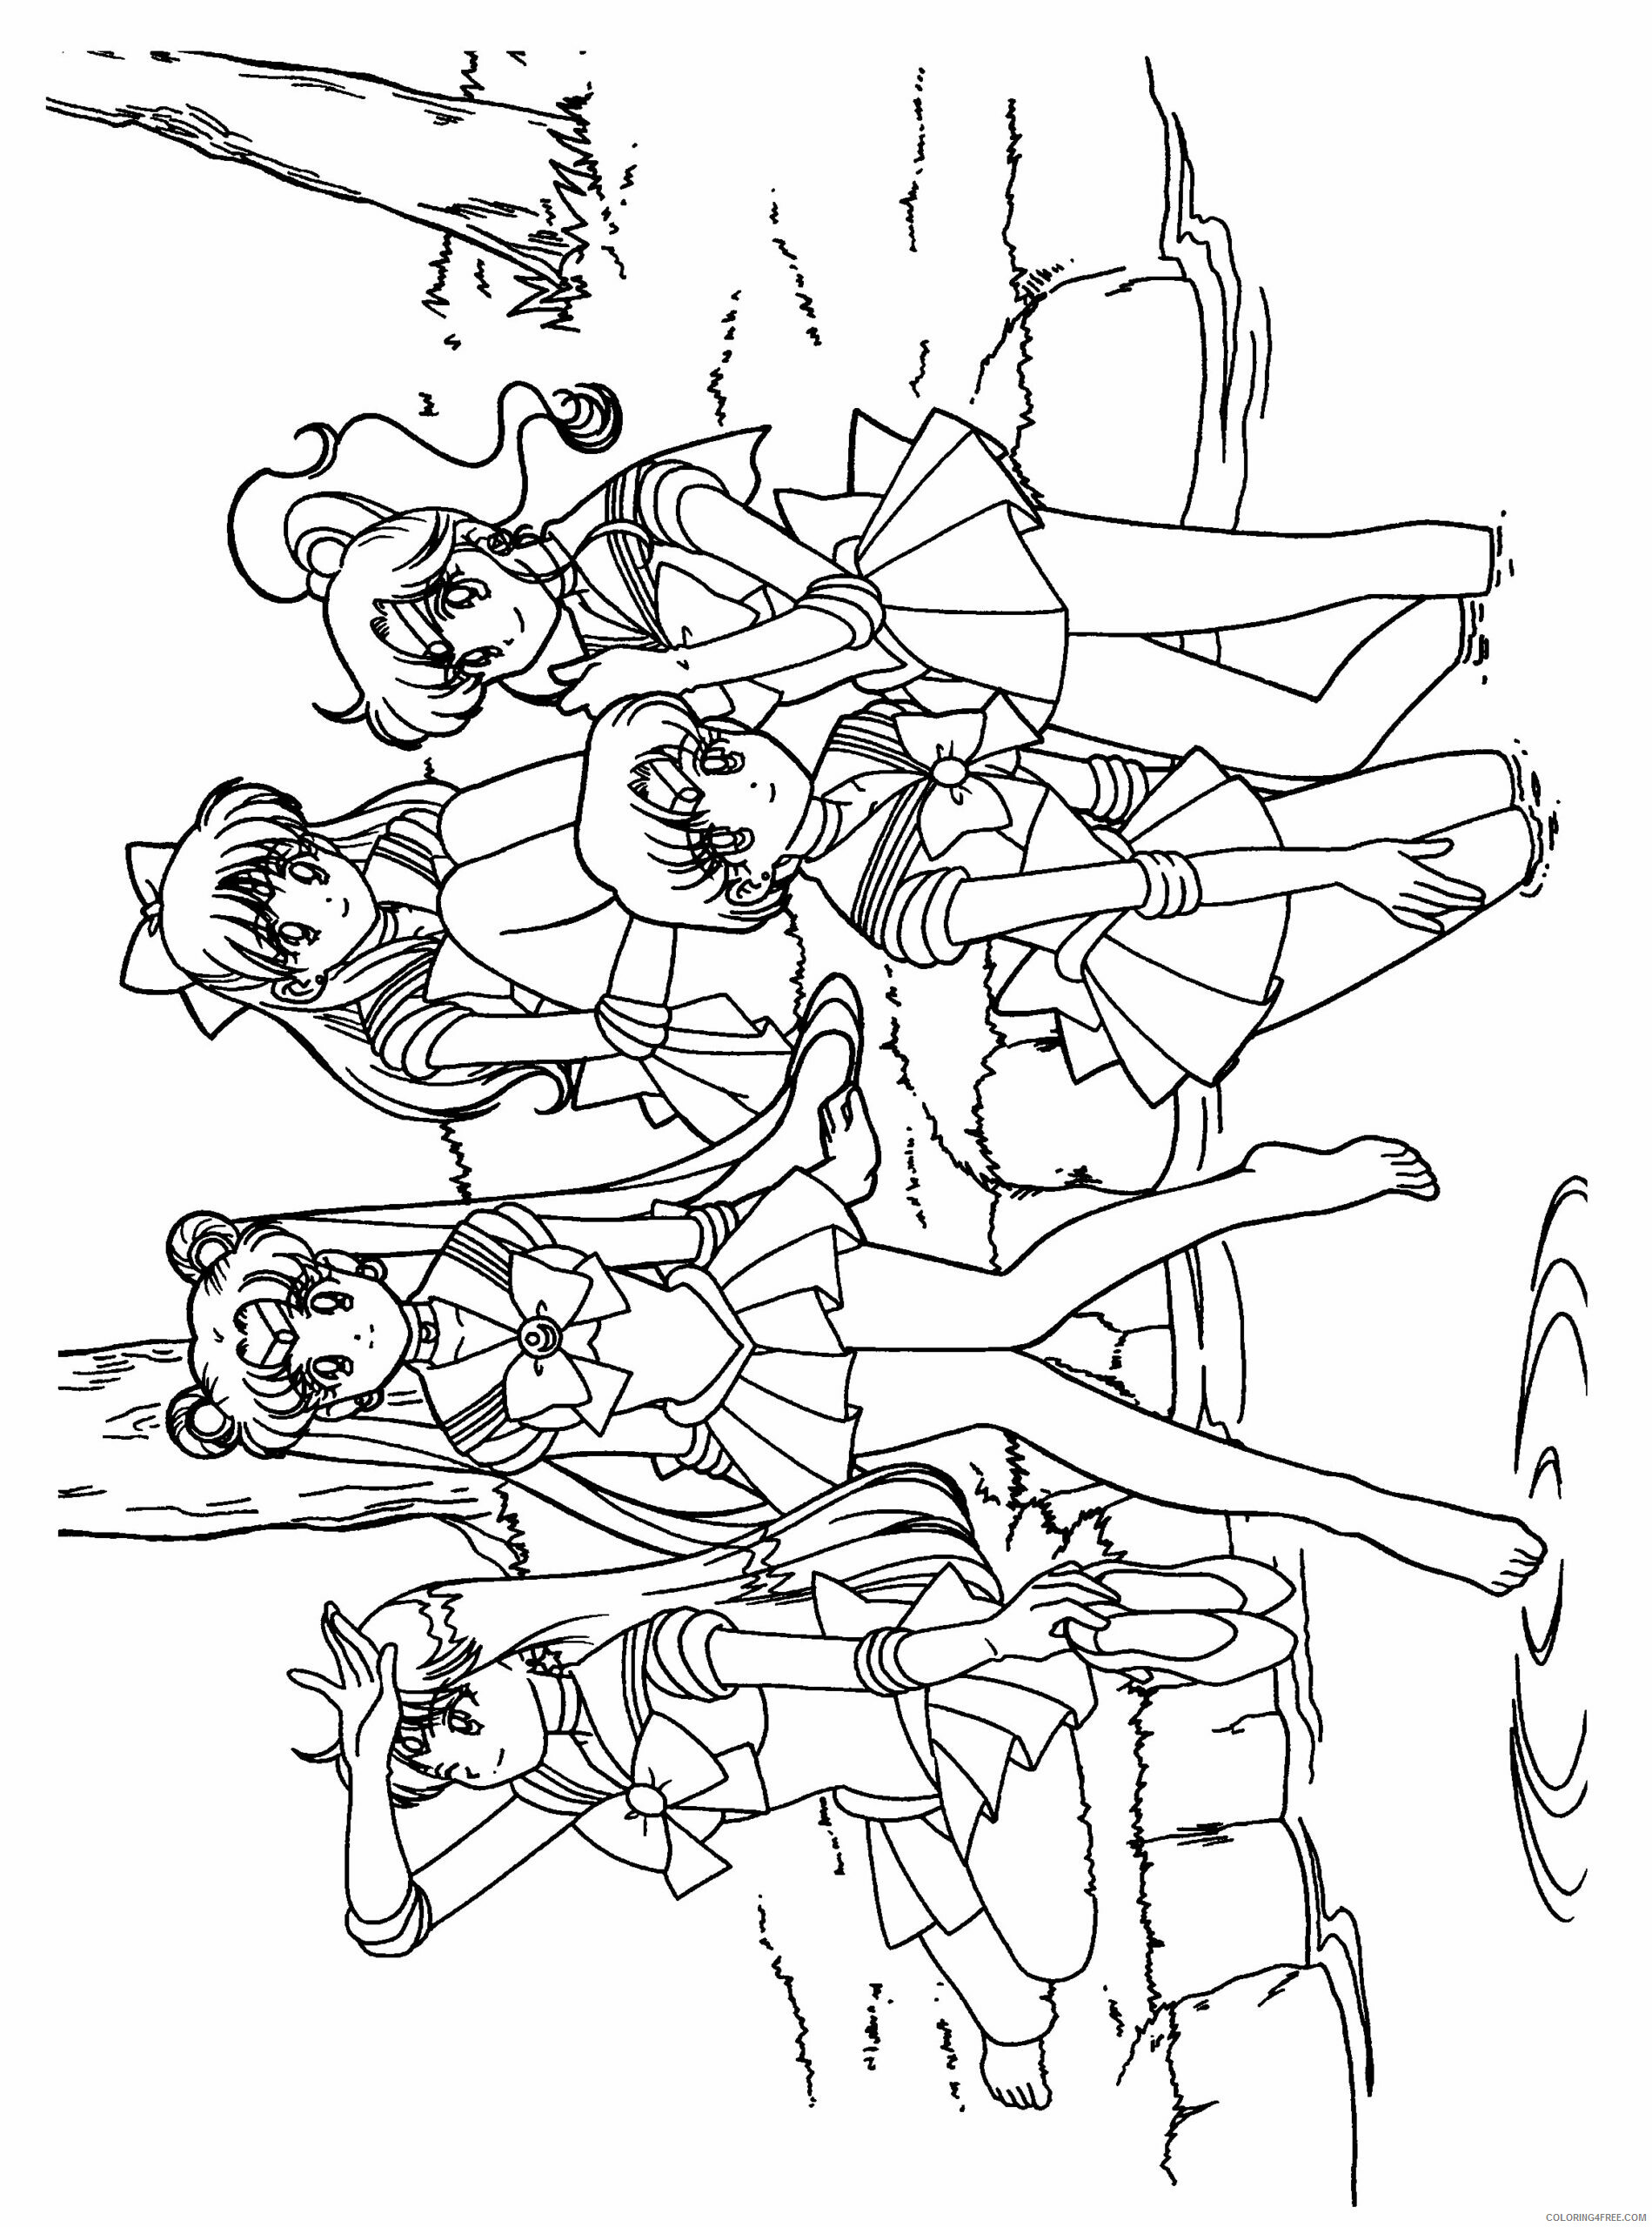 Sailor Moon Printable Coloring Pages Anime sailormoon PzUbA 2 2021 0992 Coloring4free